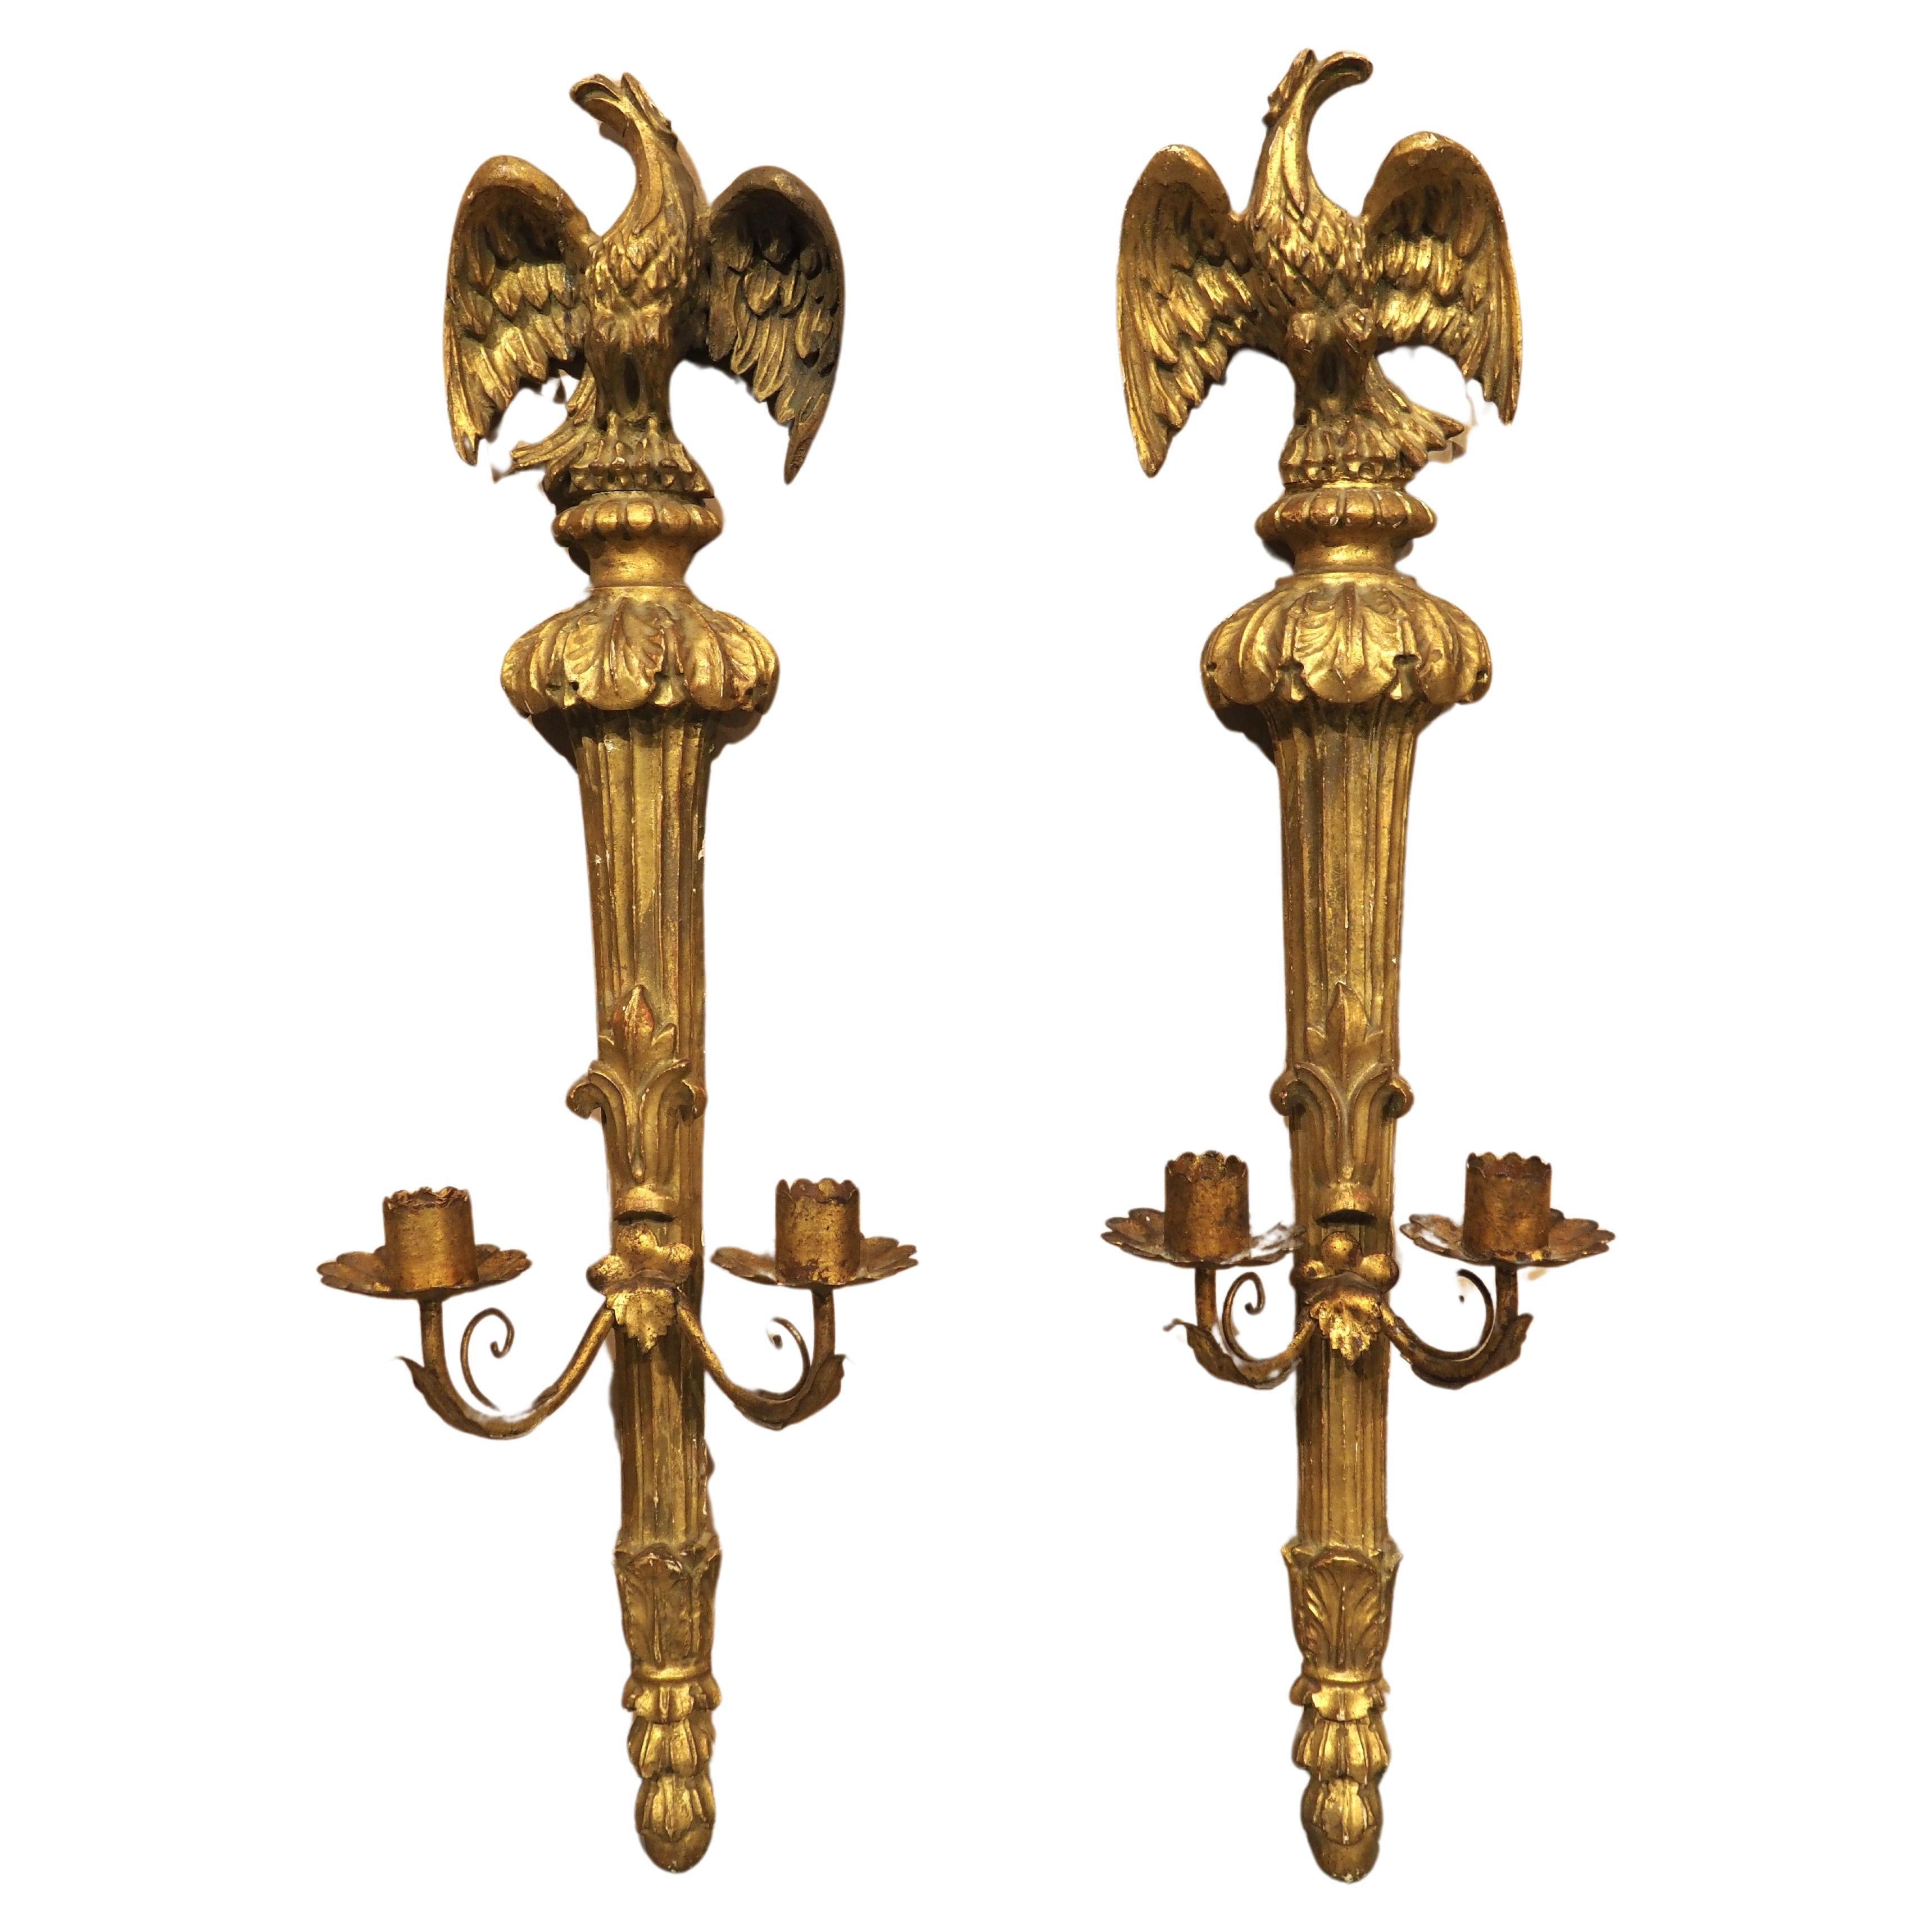 Pair of French Empire Period Giltwood Eagle Sconces, Circa 1815 For Sale